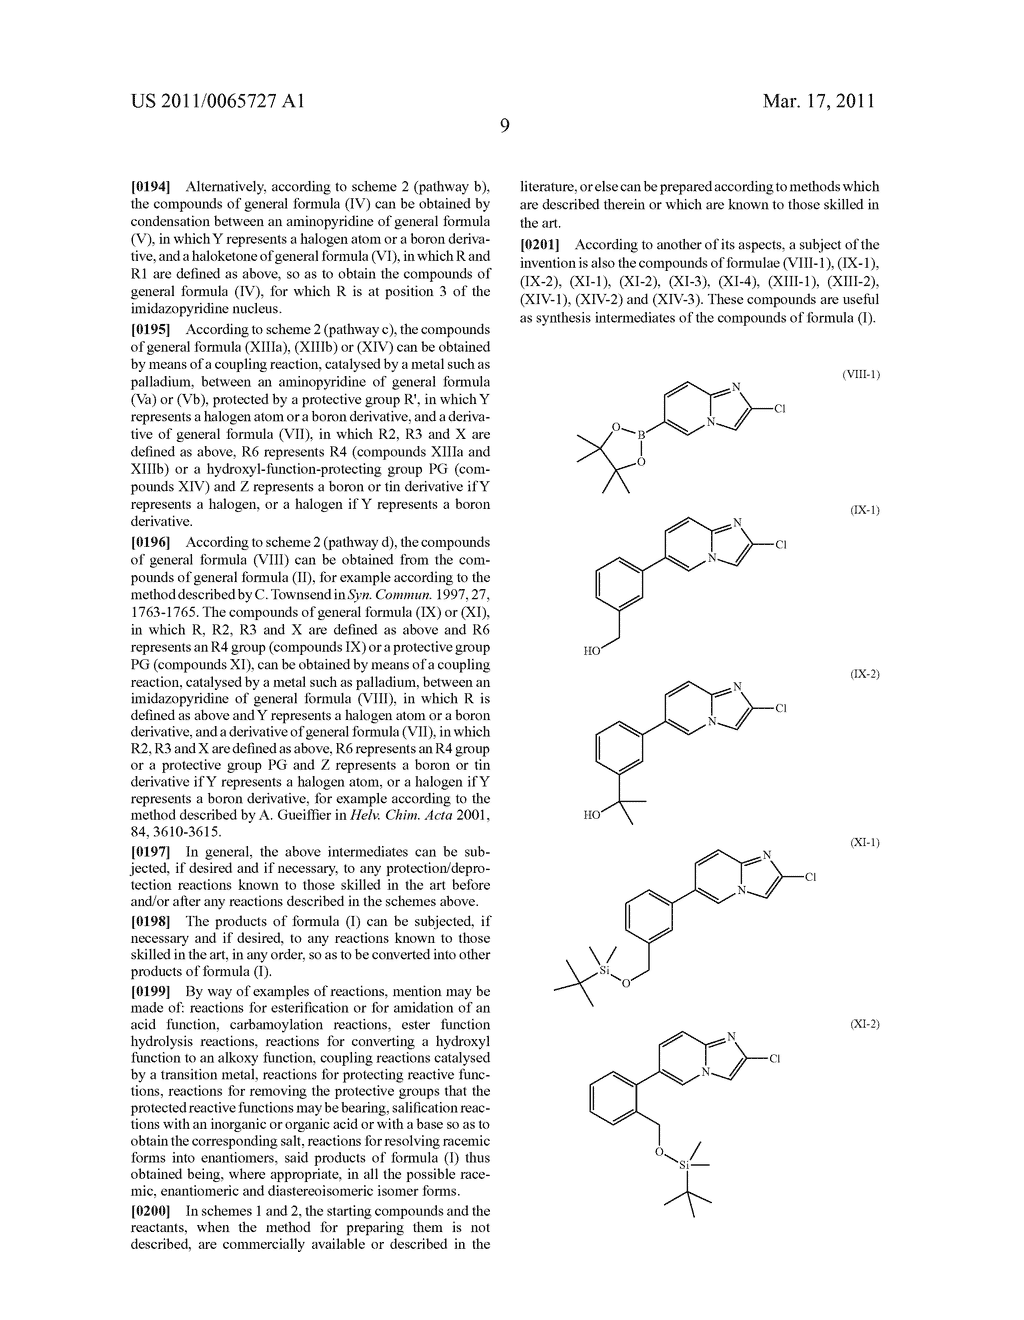 POLYSUBSTITUTED DERIVATIVES OF 2-HETEROARYL-6-PHENYLIMIDAZO[1,2-a]PYRIDINES, AND PREPARATION AND THERAPEUTIC USE THEREOF - diagram, schematic, and image 10